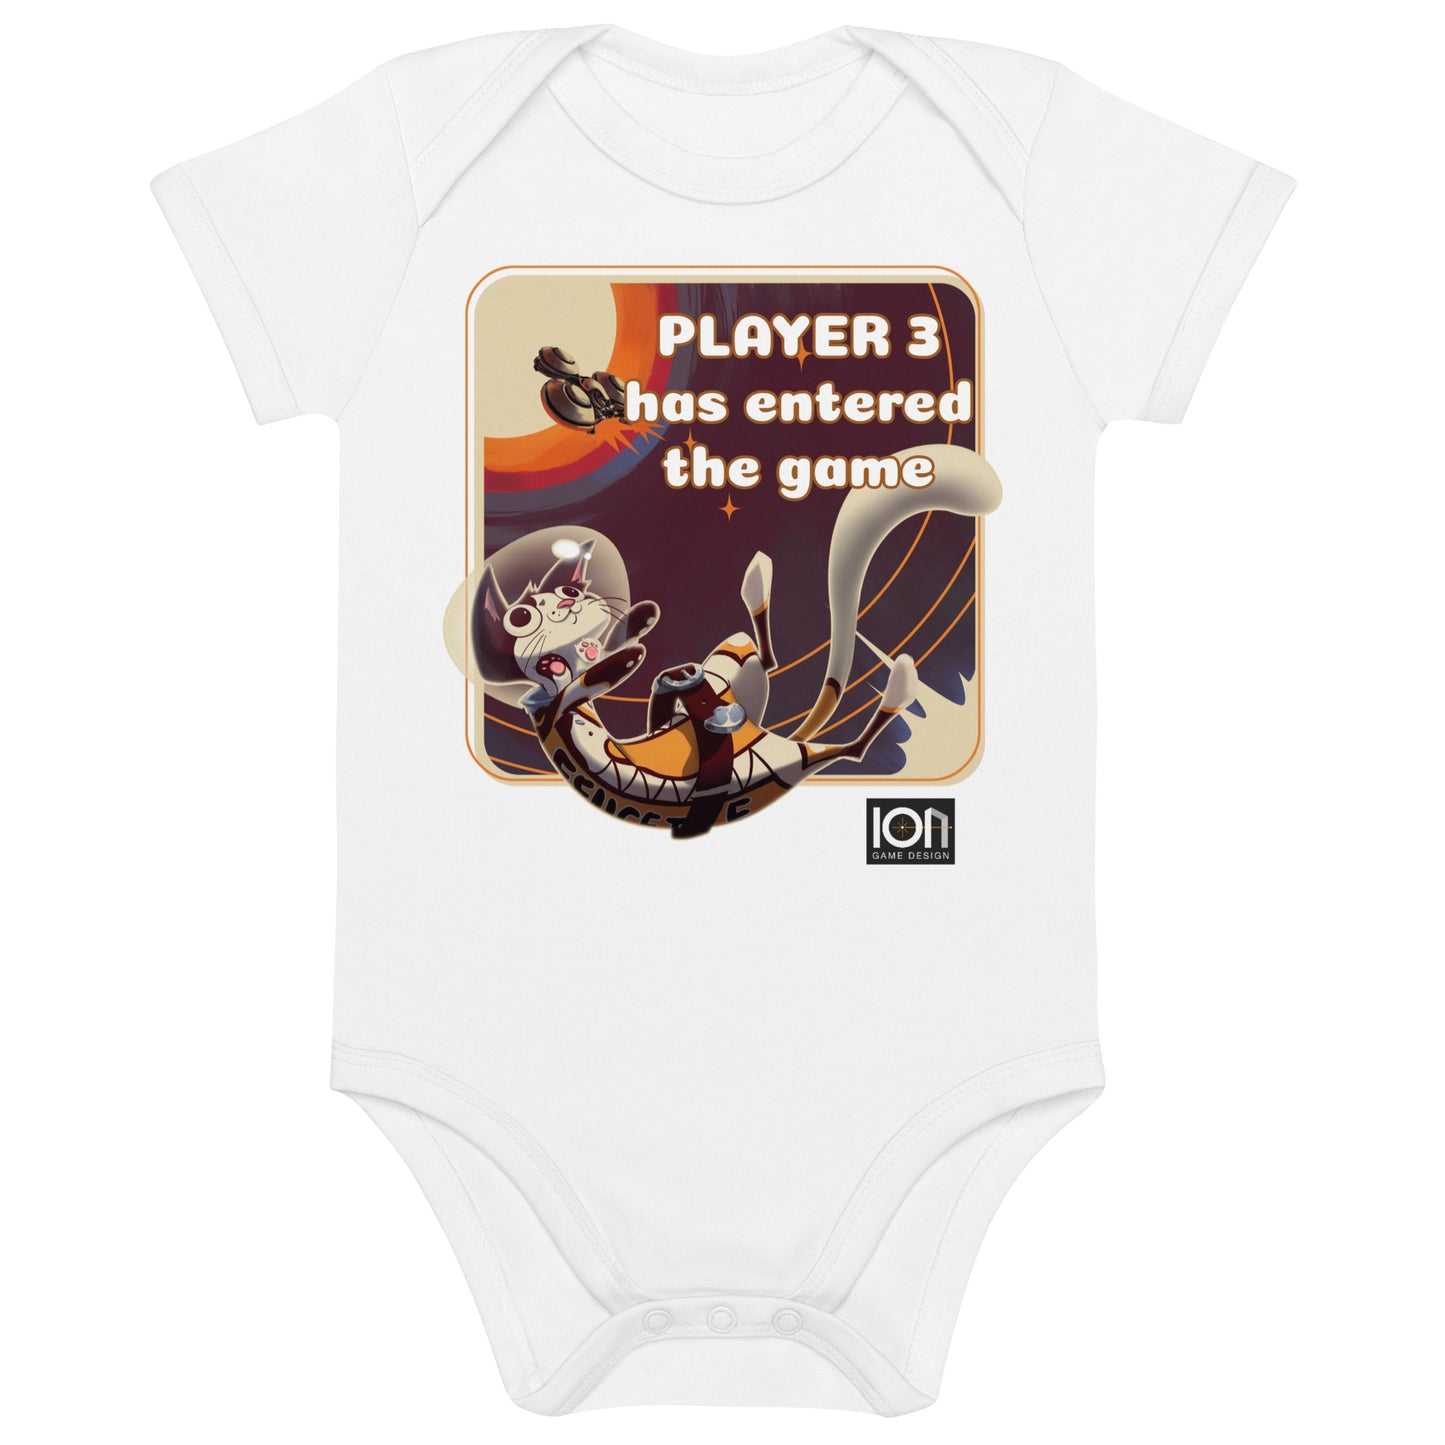 Fluffy Frontier: Organic cotton baby bodysuit - Front view of the bodysuit, featuring ION's popular board game character, Félicette